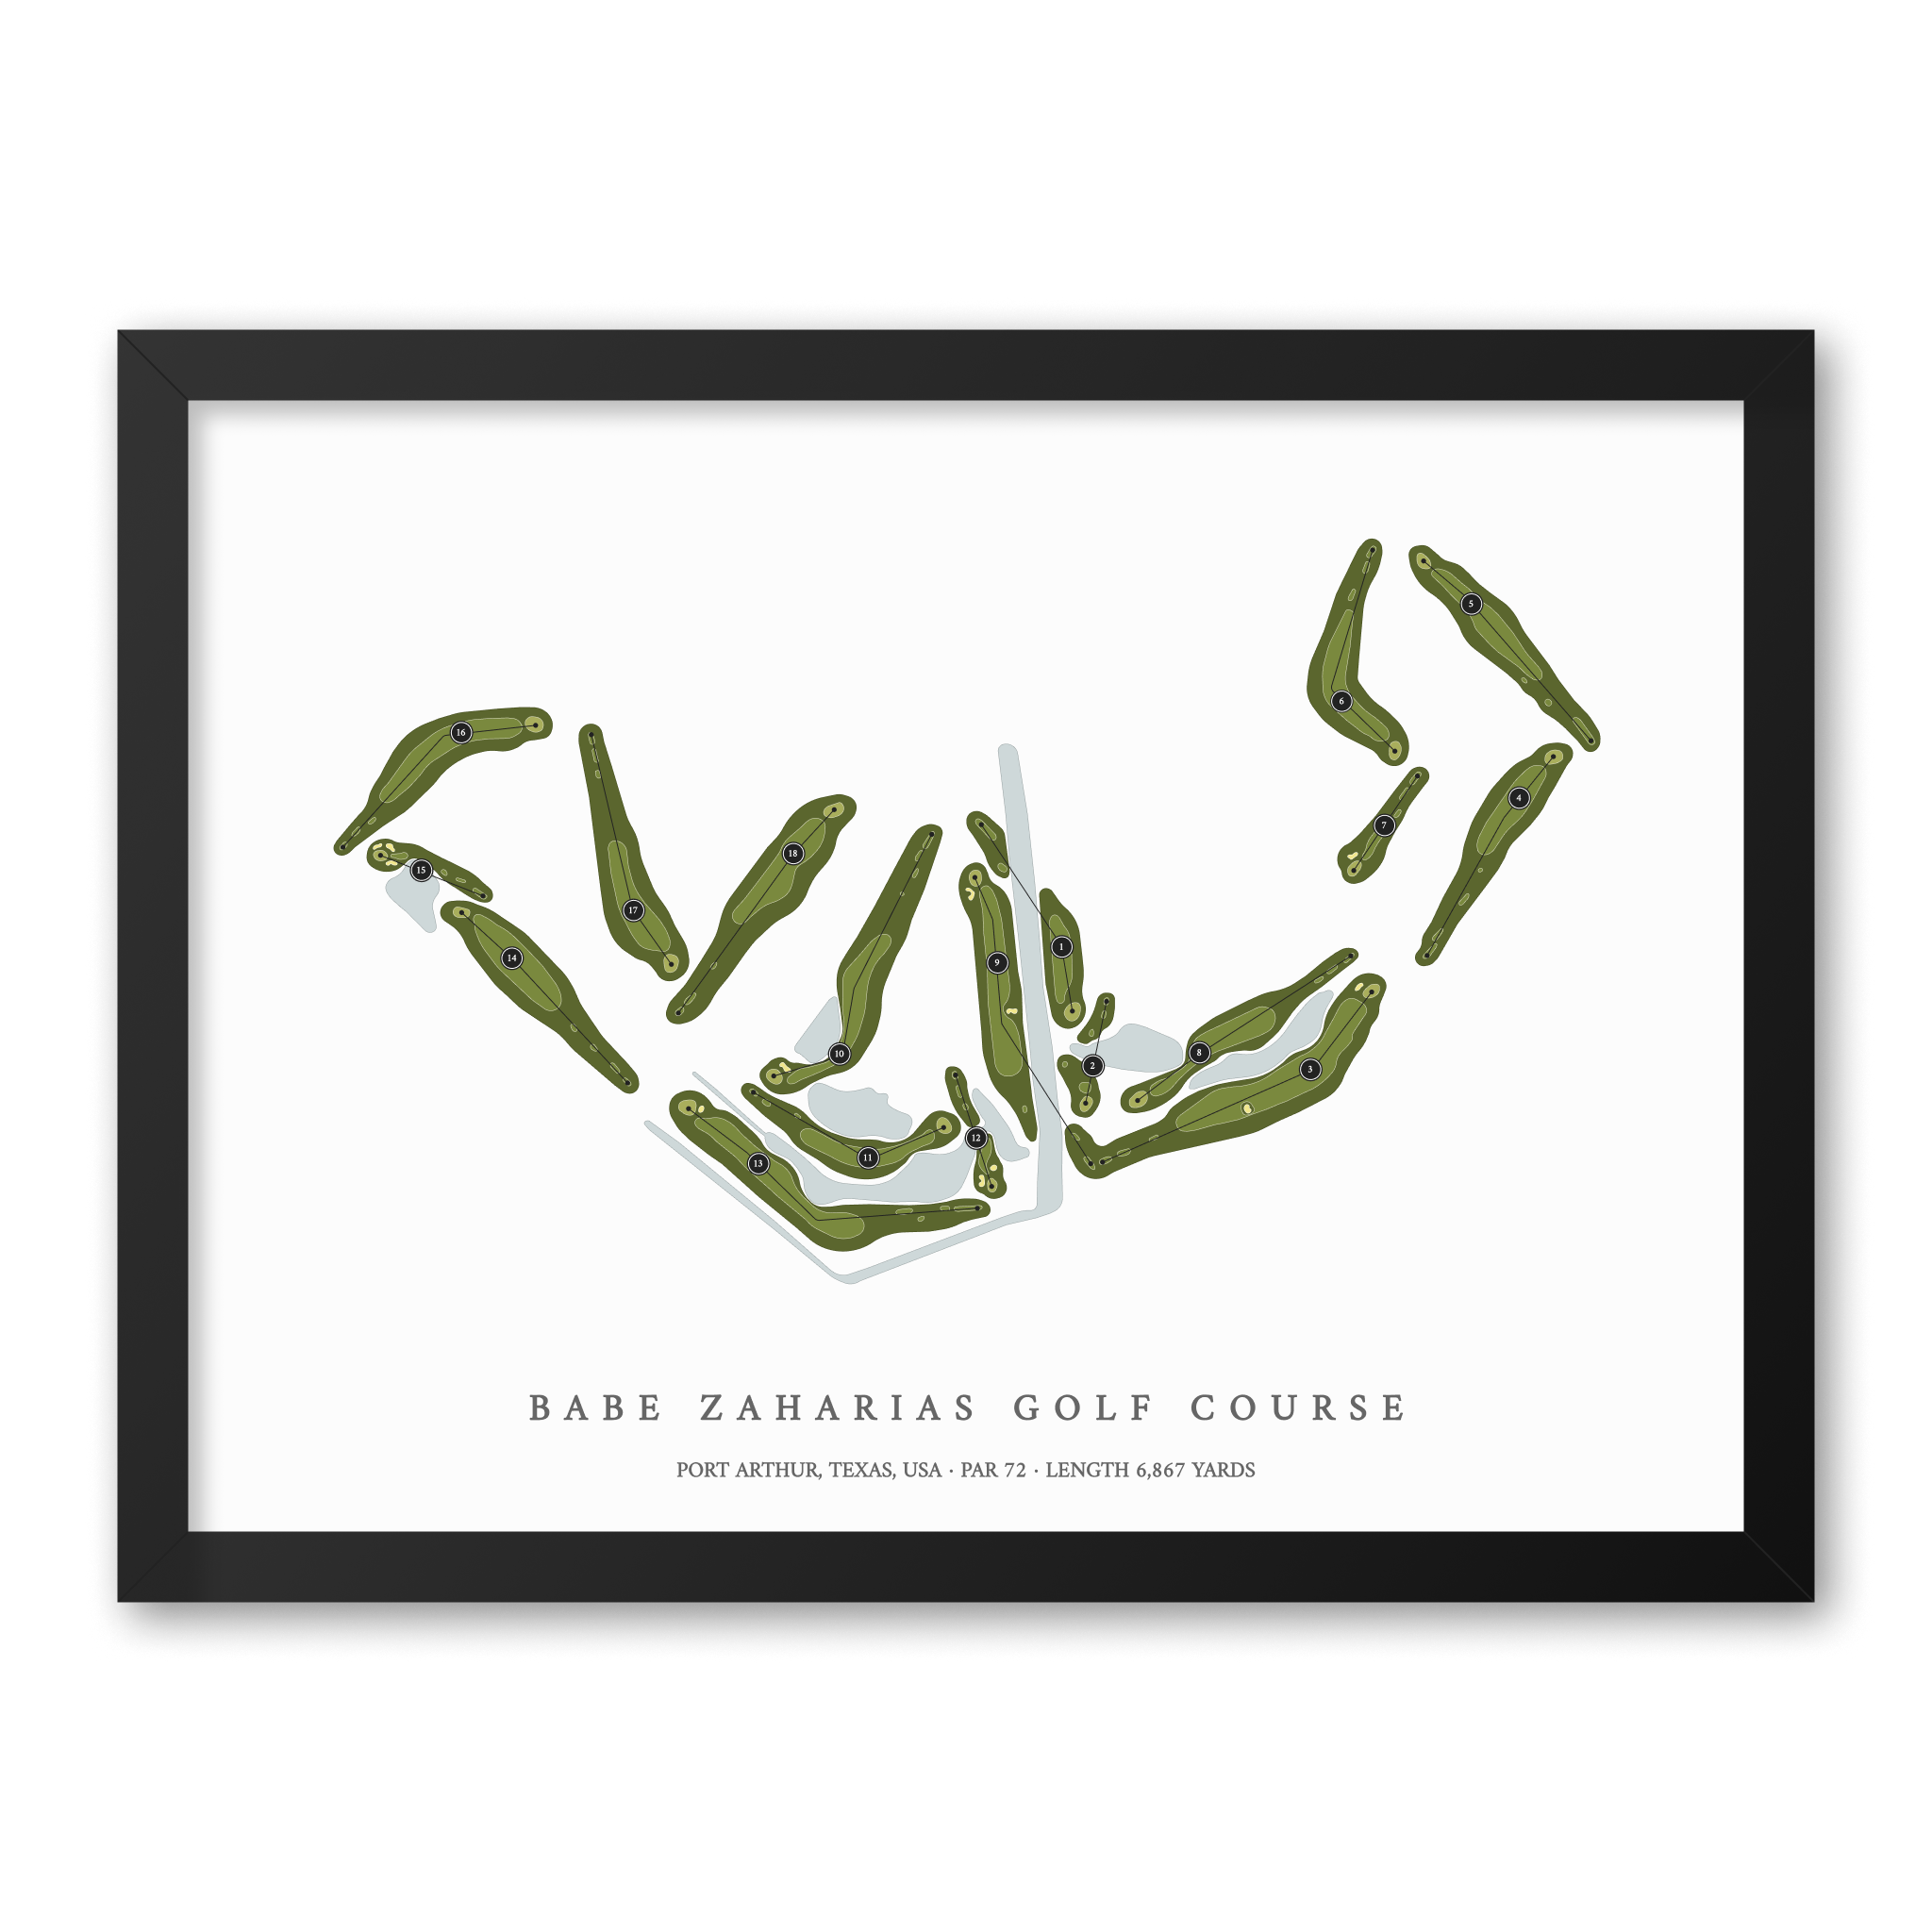 Babe Zaharias Golf Course | Golf Course Map | Black Frame With Hole Numbers #hole numbers_yes